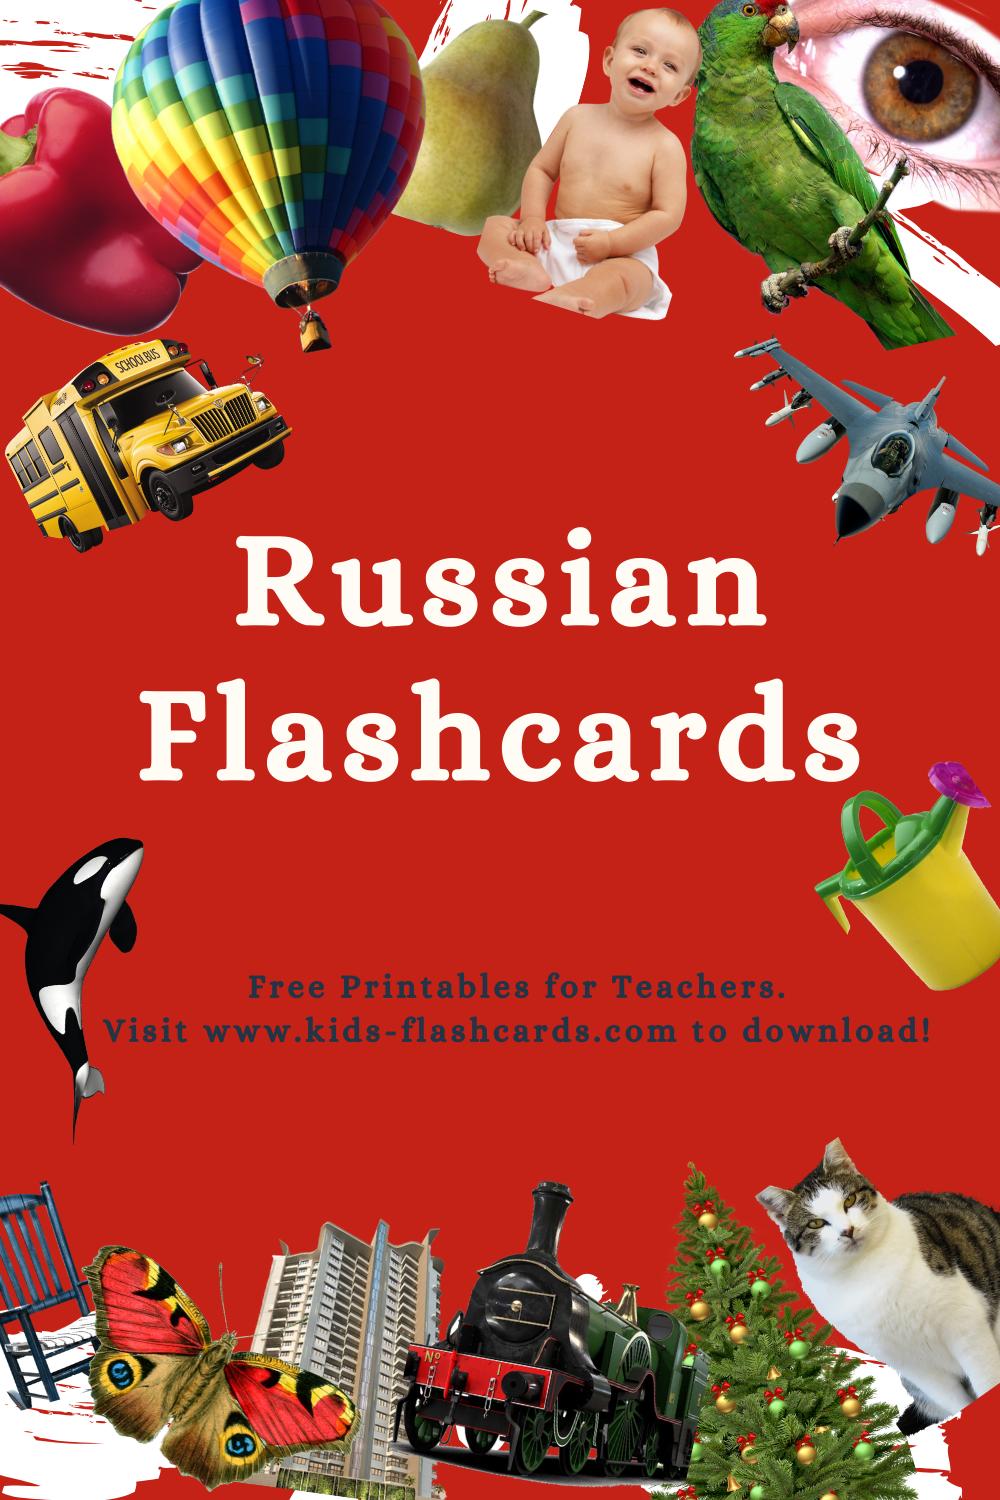 Worksheets to learn Russian language